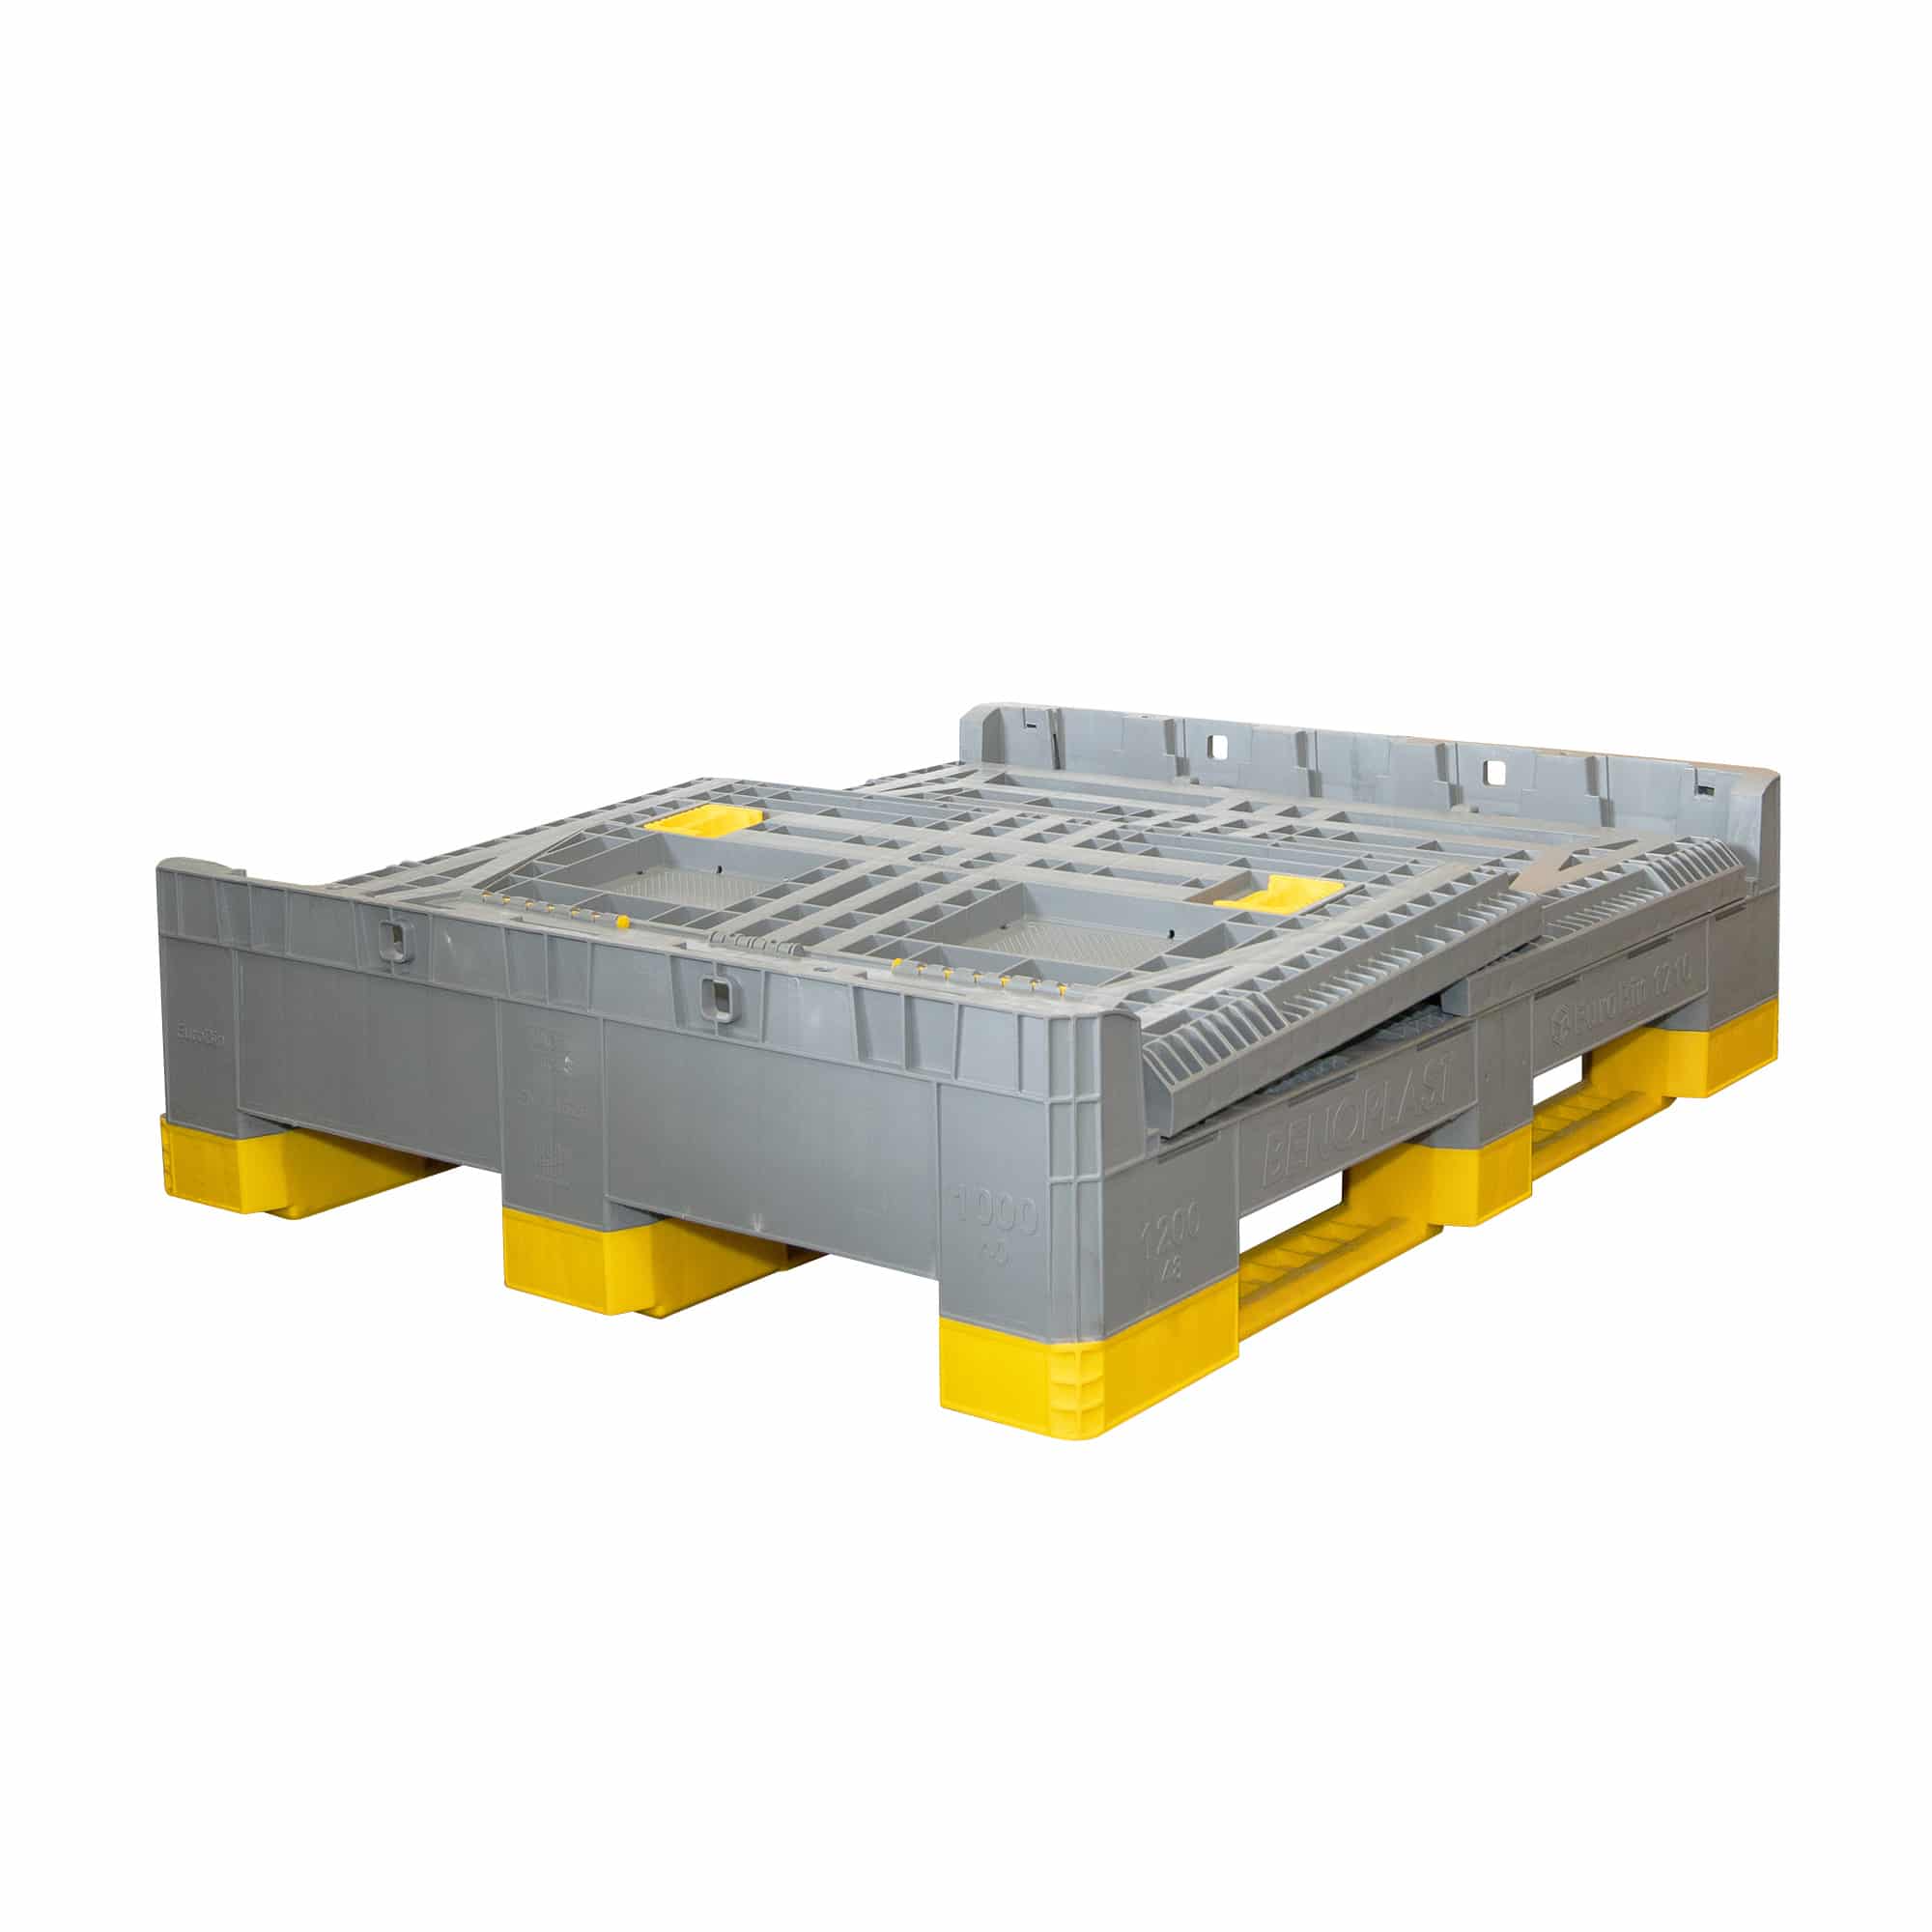 Palboxx Collapsible Pallet Box 1200mm x 1000mm x 597mm - 3 Runners